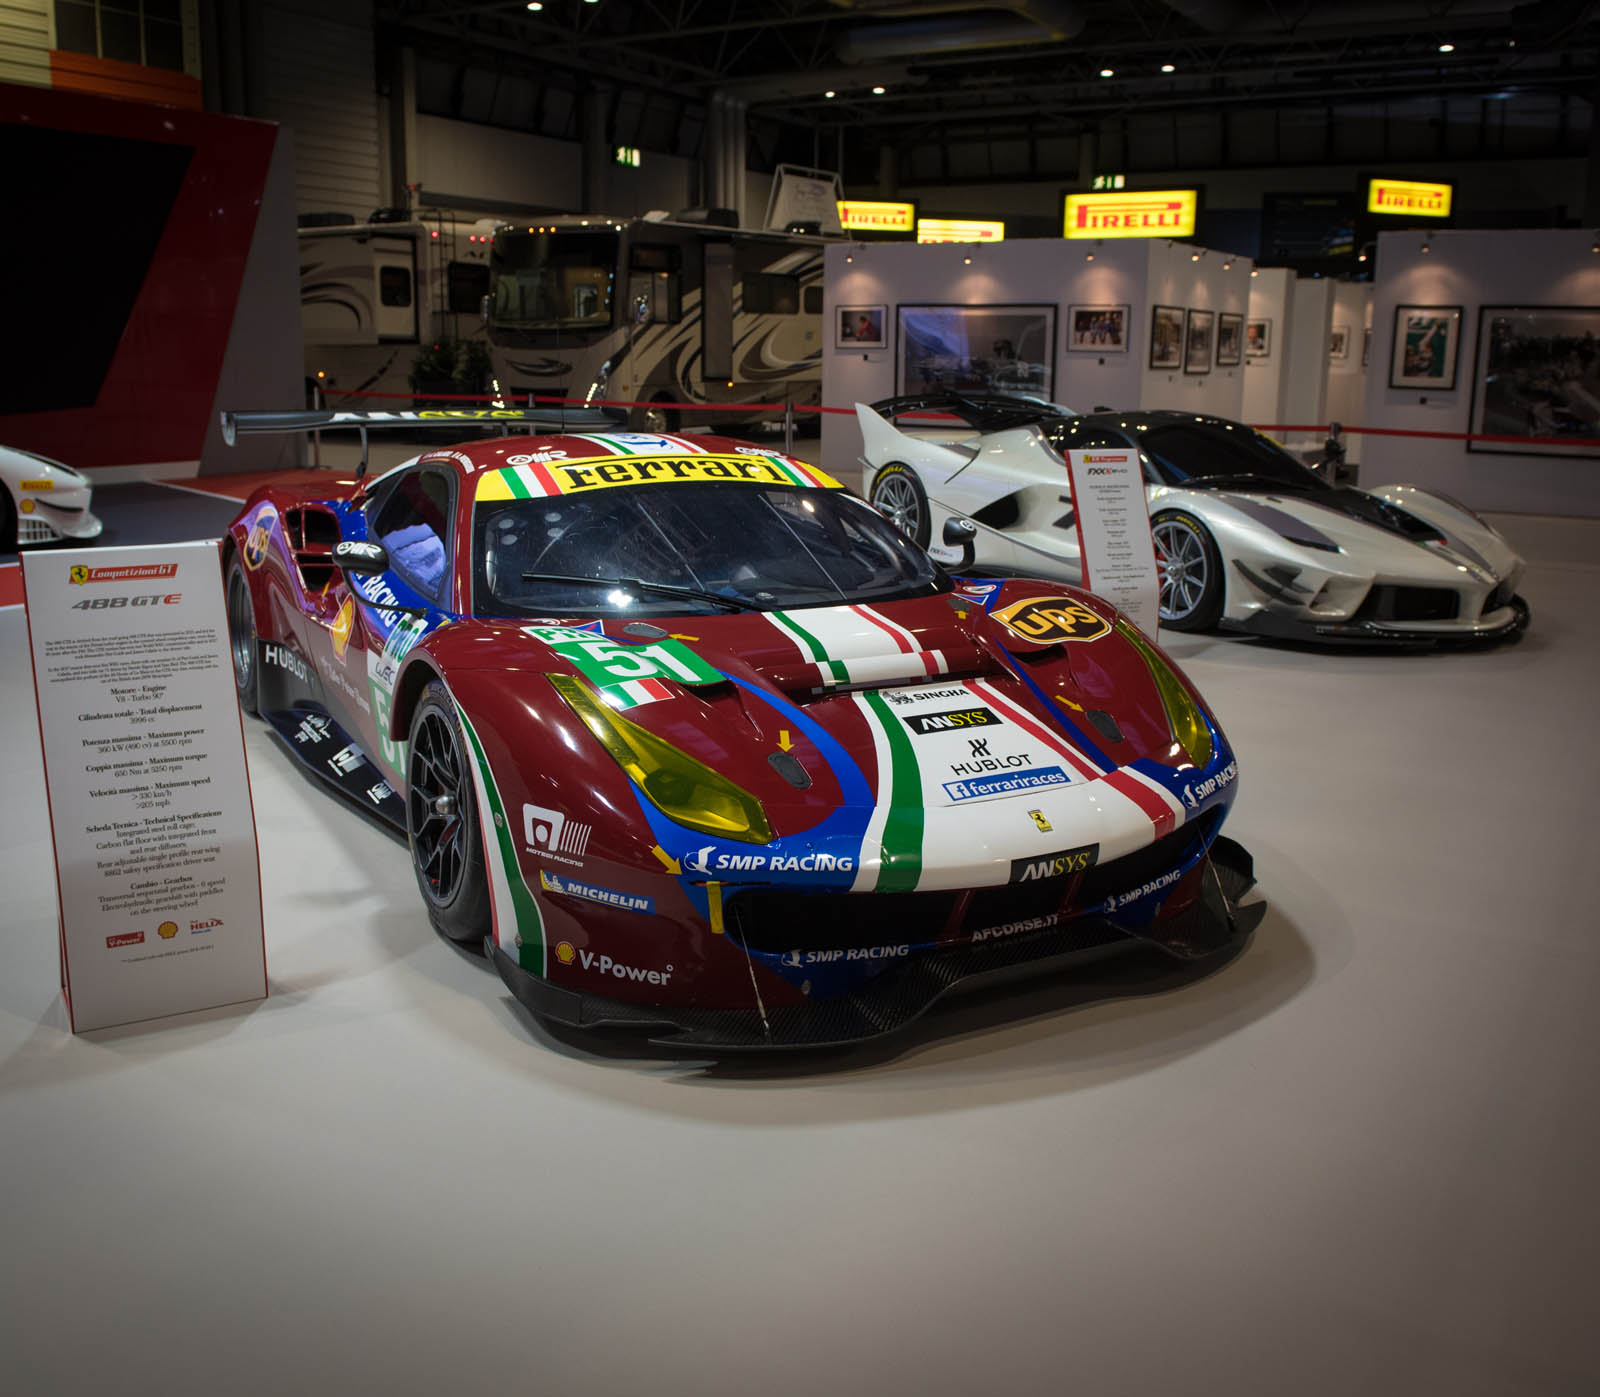 Ferrari s Racing  Cars Are A Sight To Behold At Autosport 